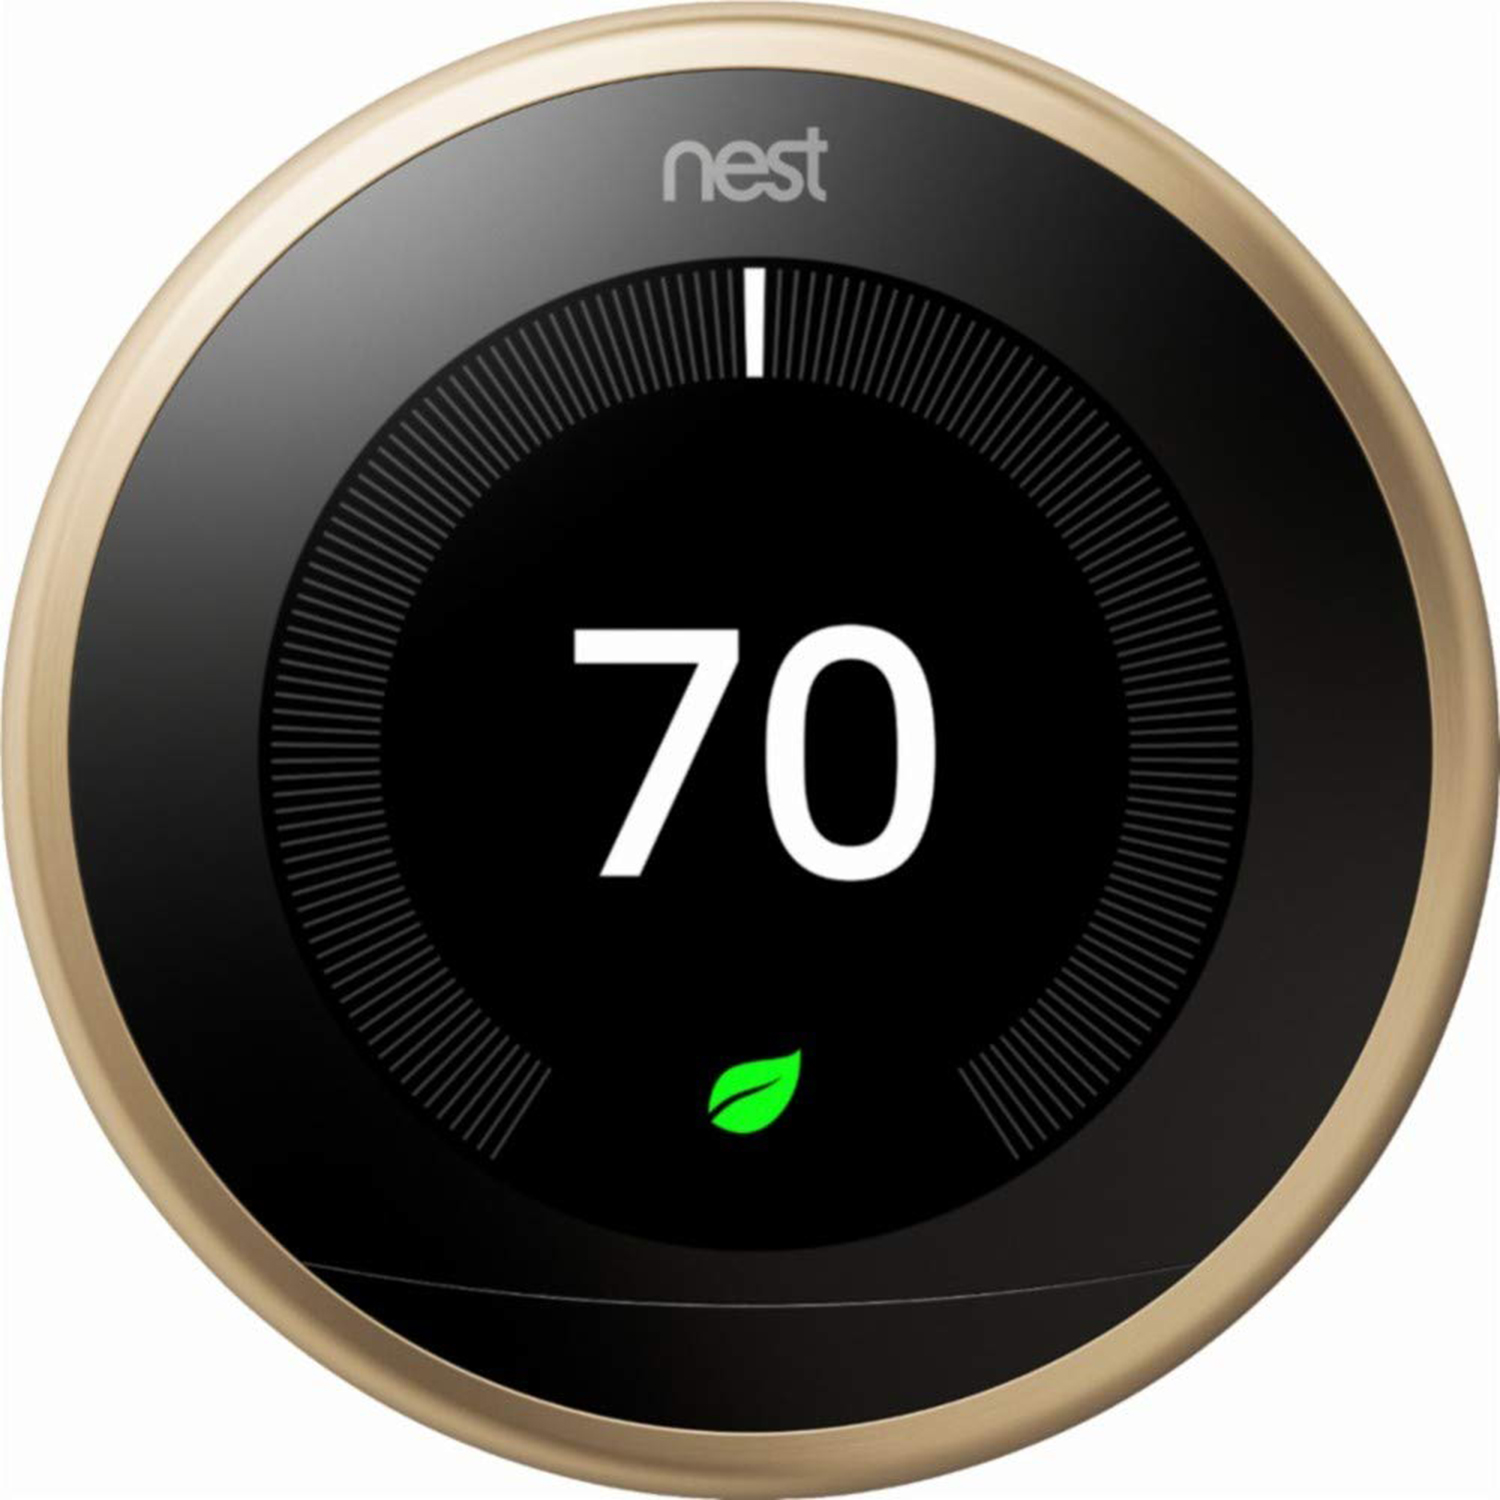 Nest T3032US Nest Smart Learning Programmable Thermostat - 3rd Generation, Brass - image 1 of 5